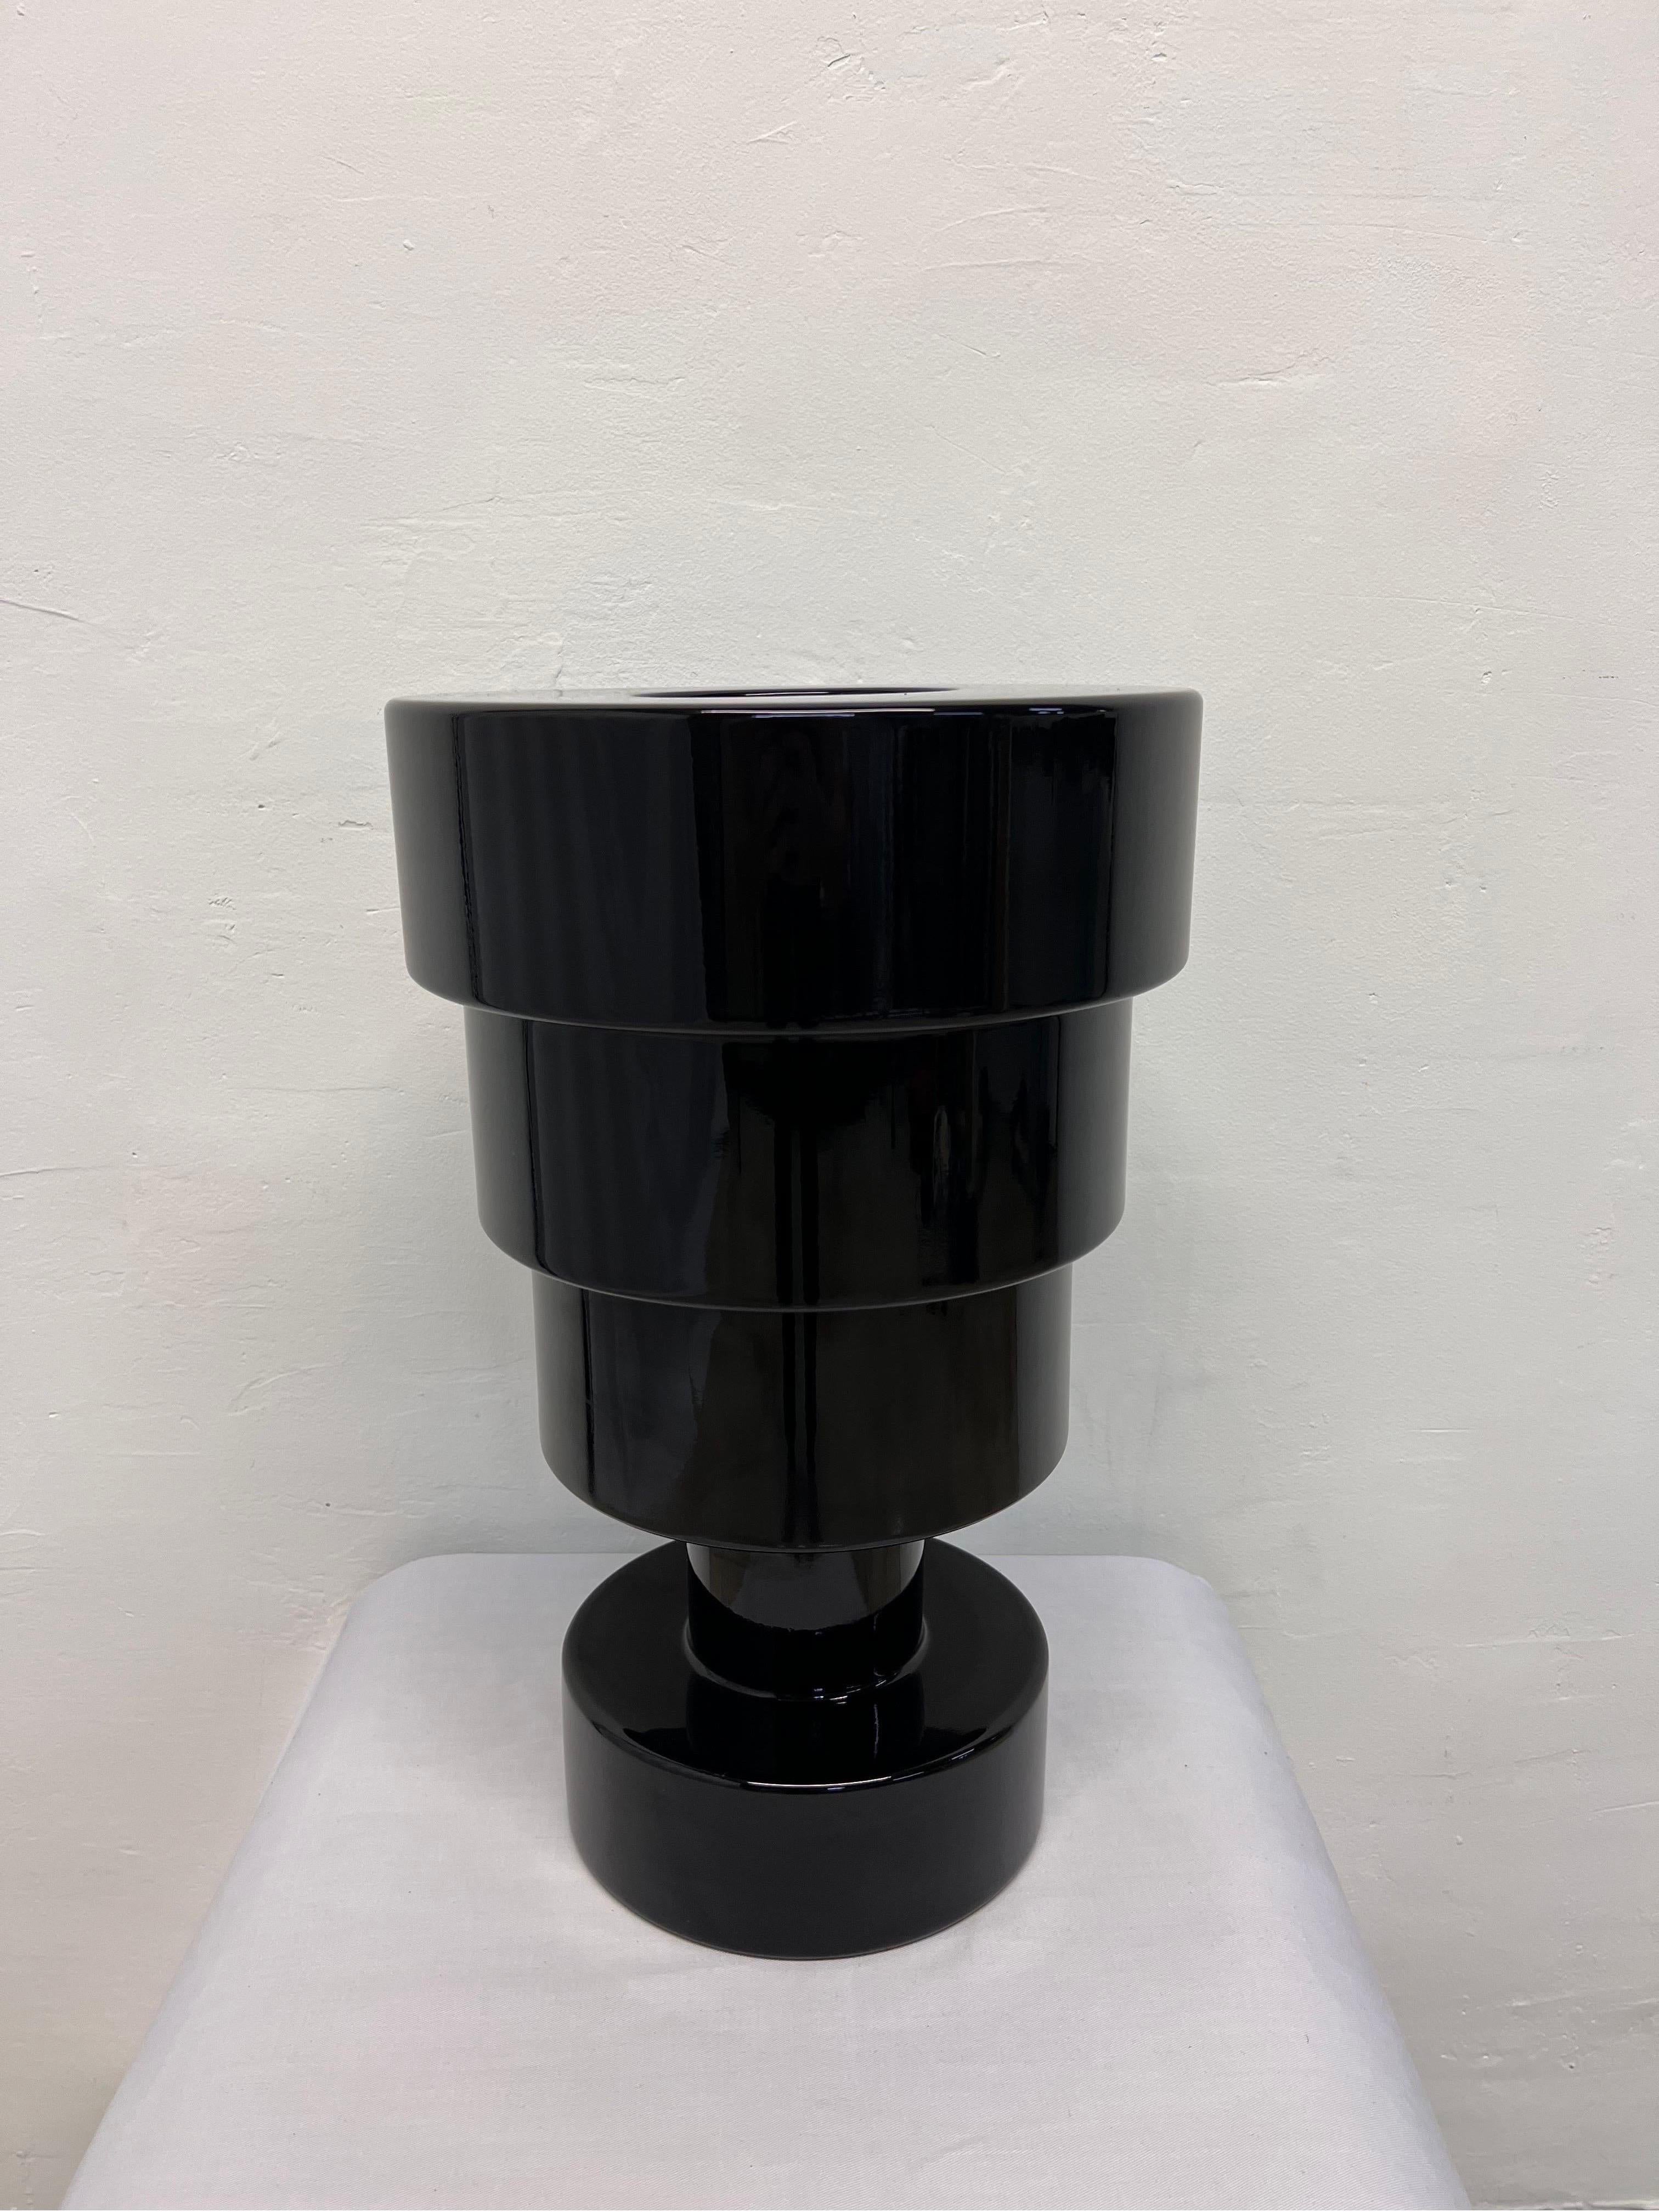 Glossy black Calice vase designed by Ettore Sottsass and manufactured by Kartell for 